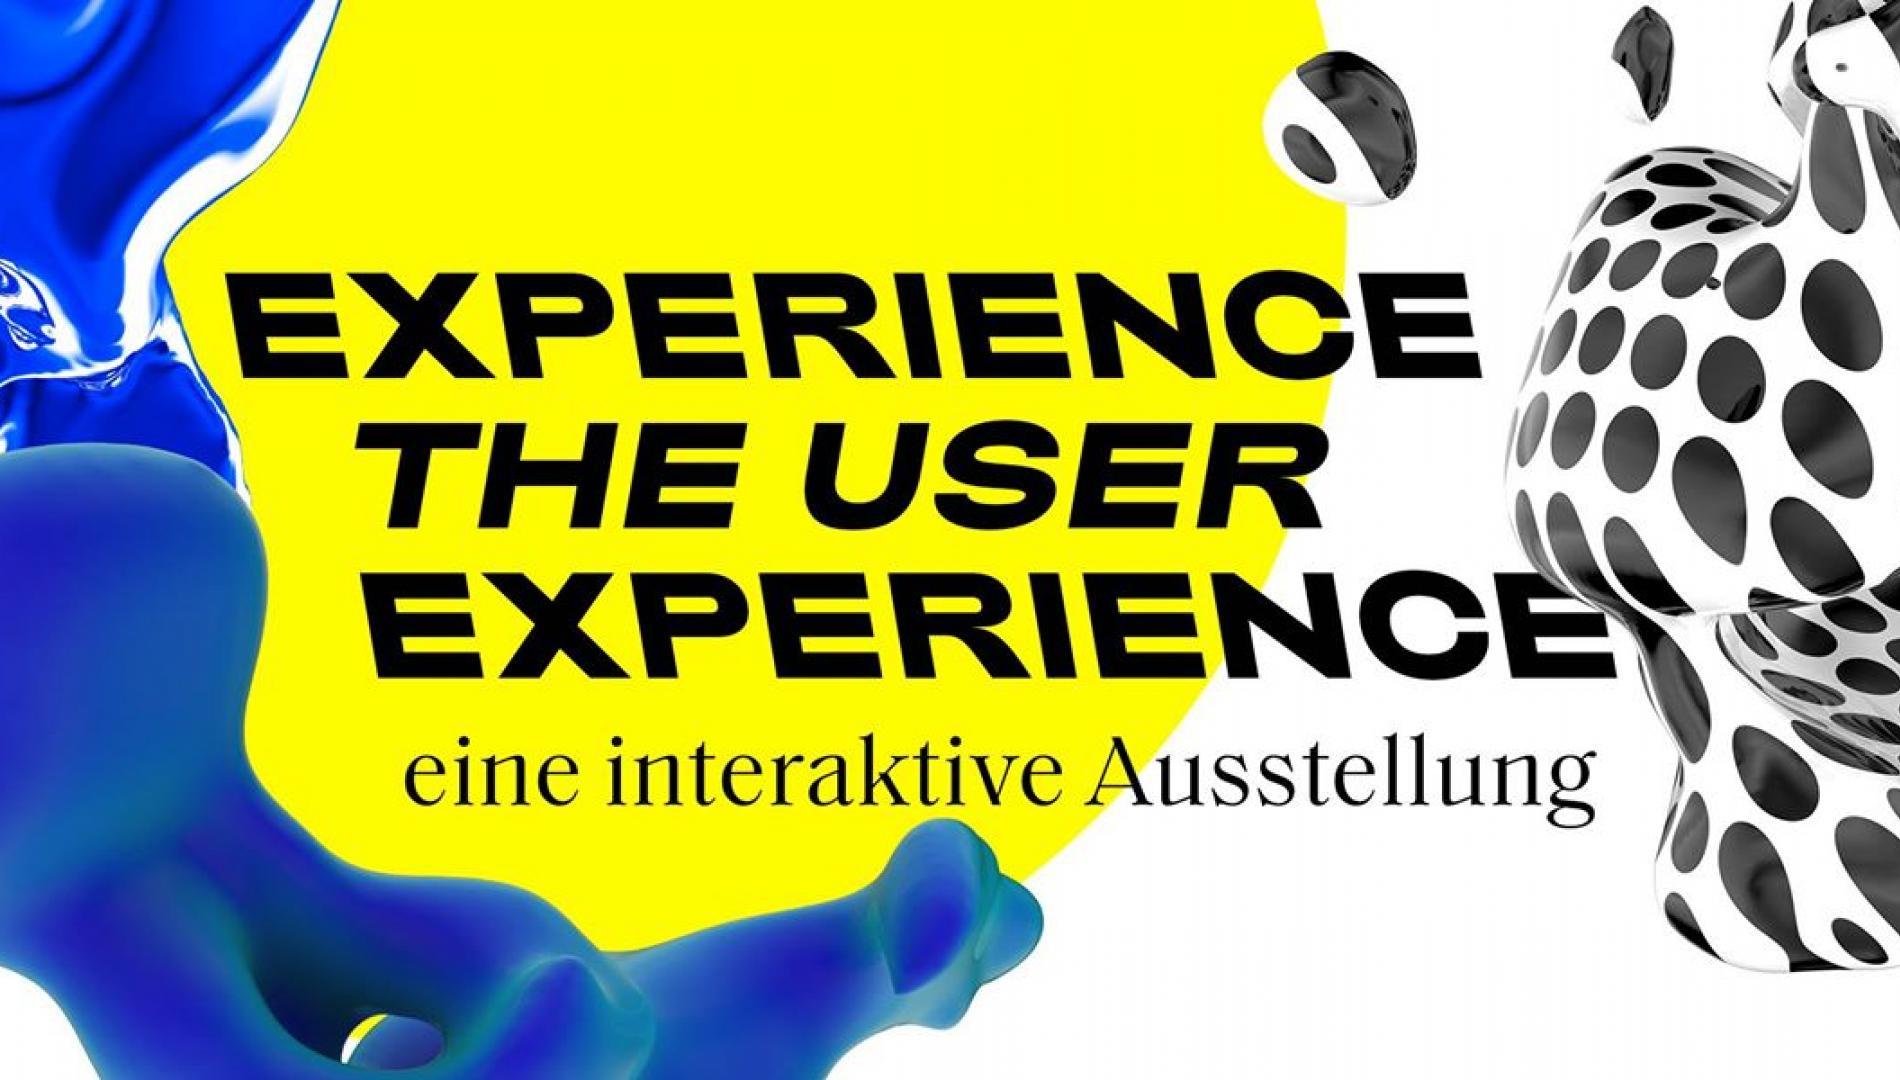 Experience the User Experience